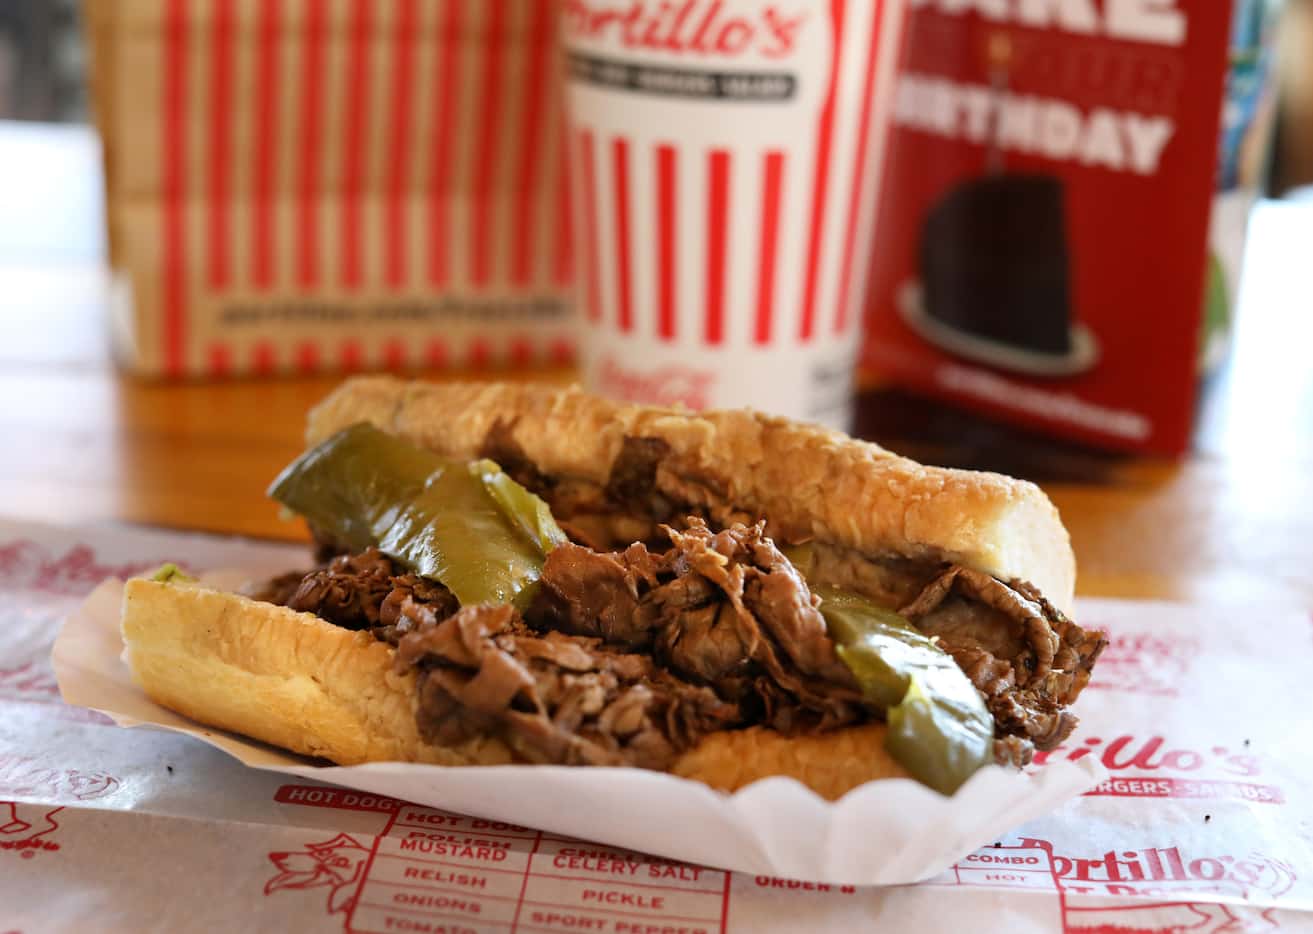 The Italian Beef sandwich with peppers is a popular order at Portillo's in Allen.